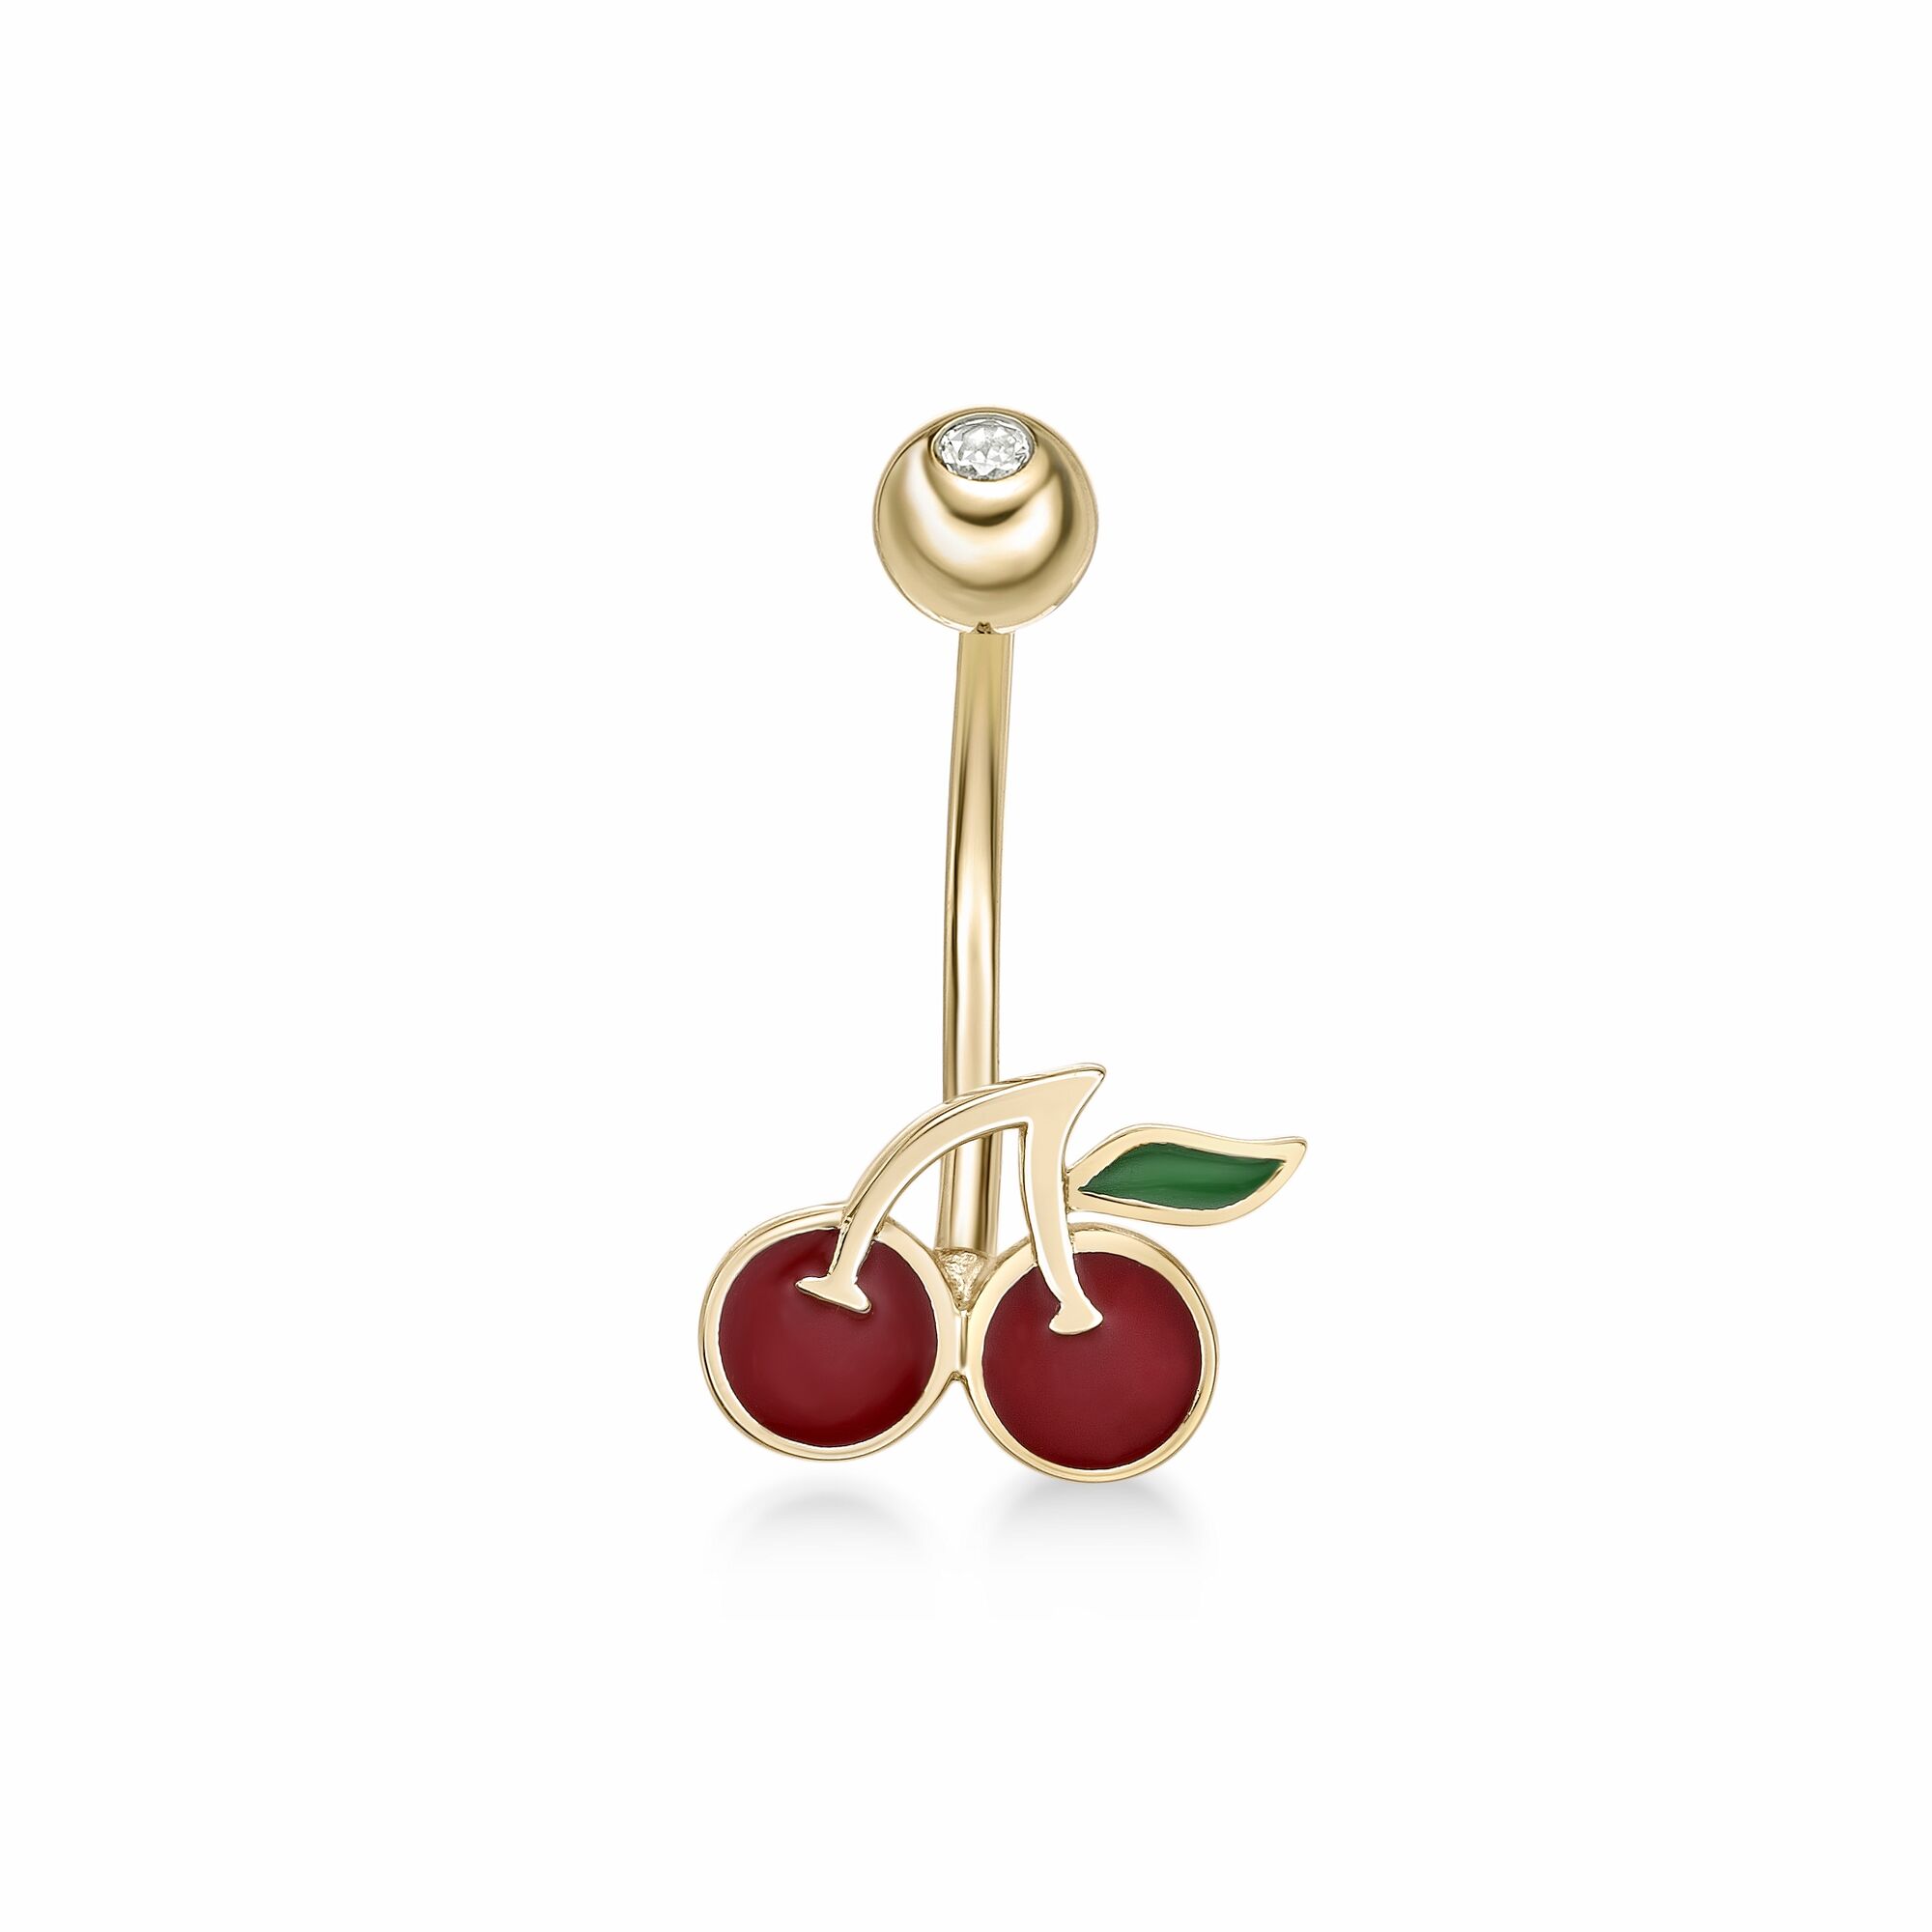 Lavari Jewelers Women’s Red and Green Enamel Cherry Belly Ring with Cubic Zirconia, 10K Yellow Gold, 16 Gauge